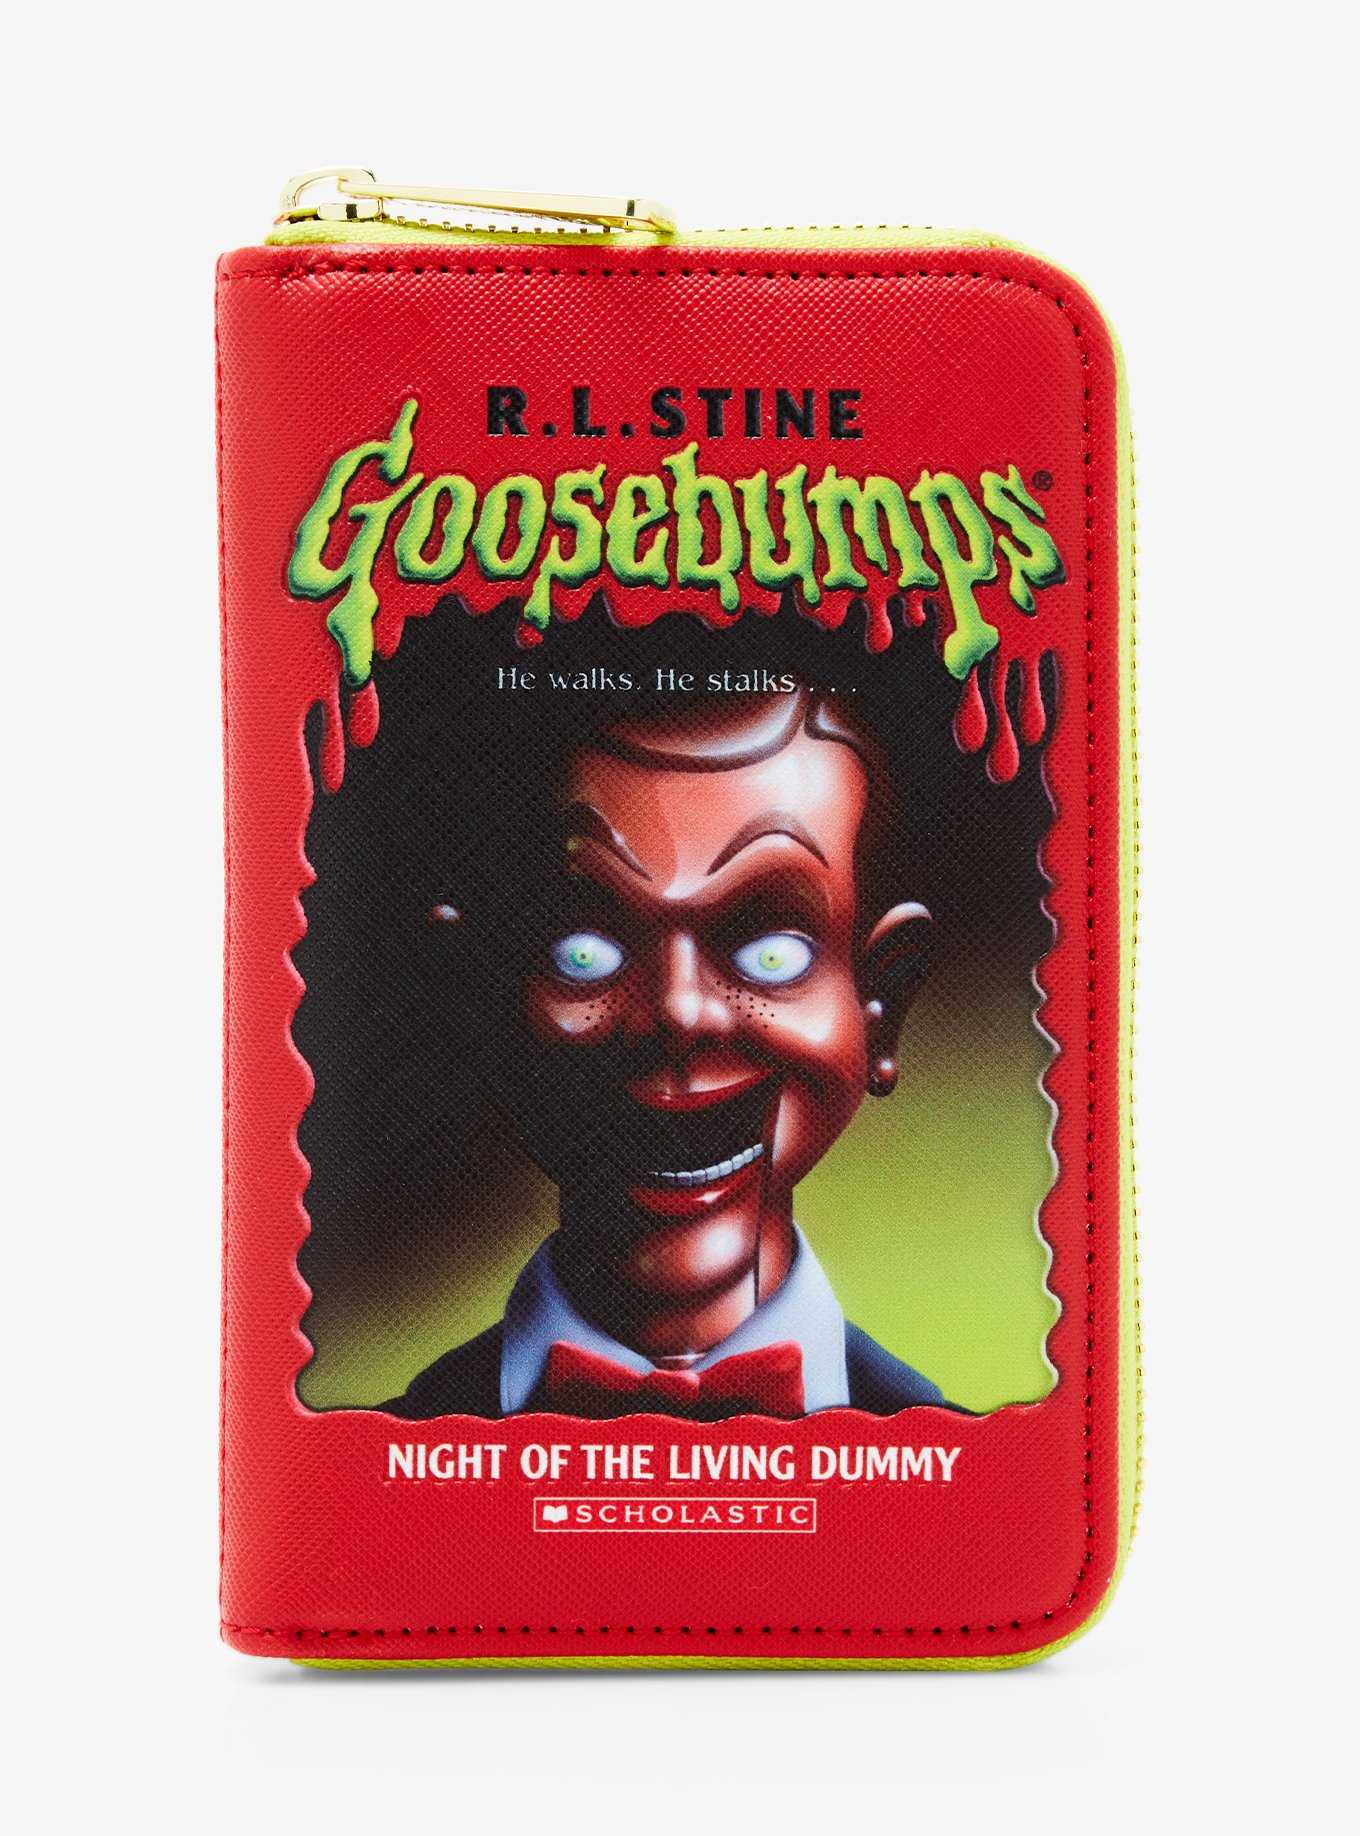 Loungefly Goosebumps Night of the Living Dummy Book Small Zip Wallet, , hi-res